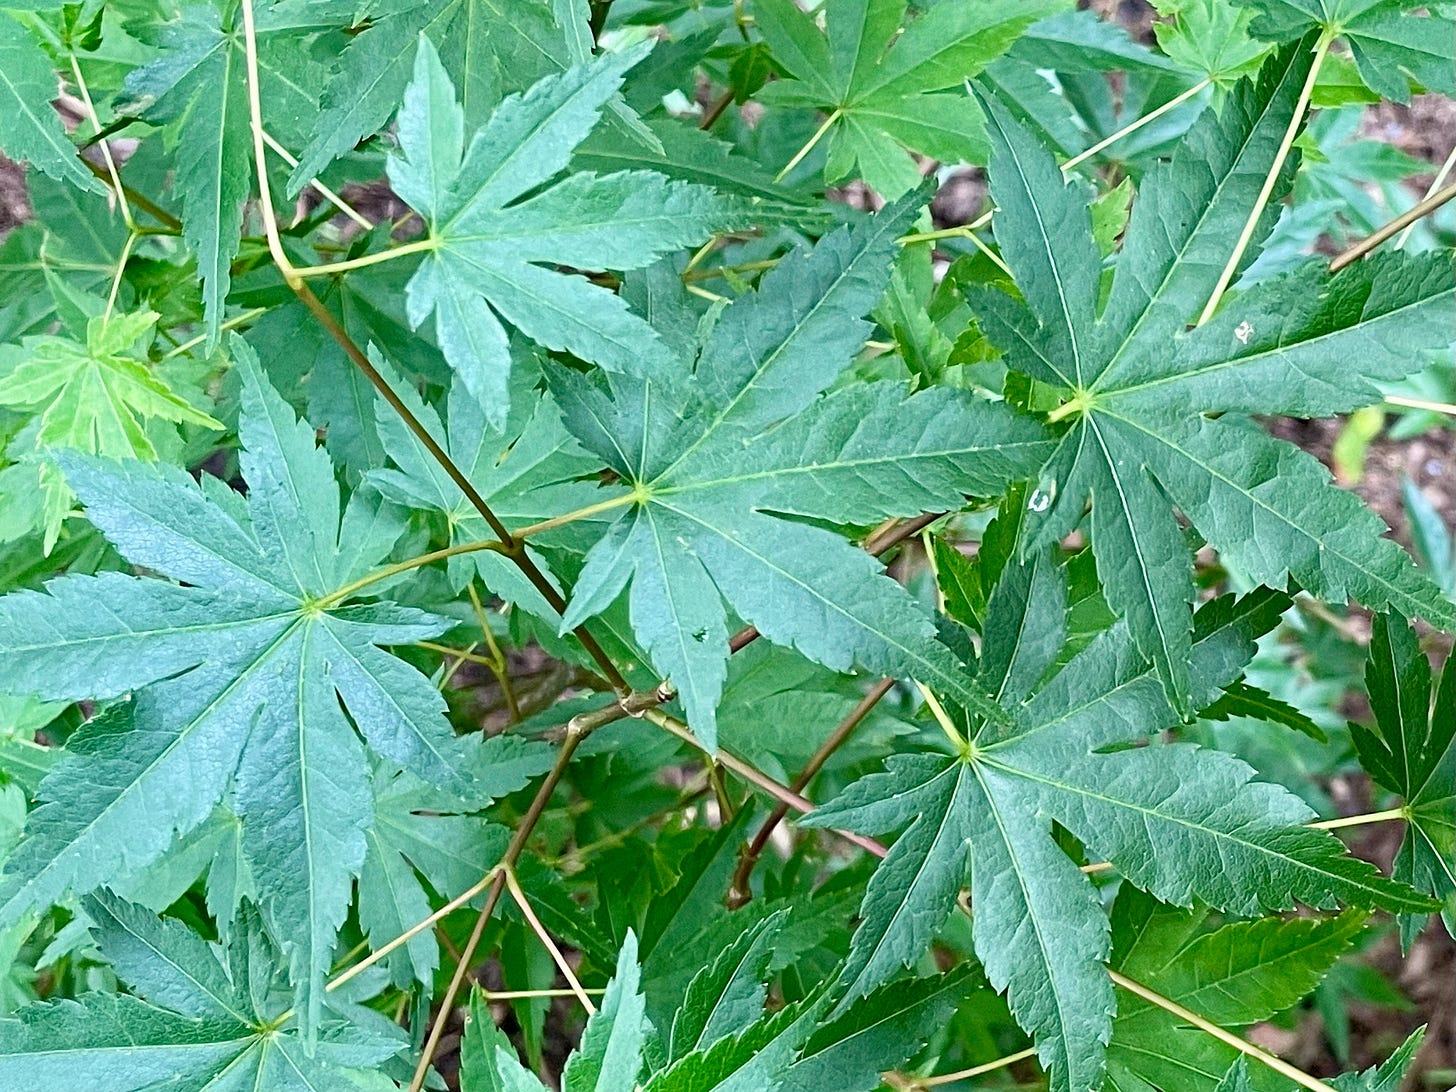 ID: Close up photo of Japanese maple leaves